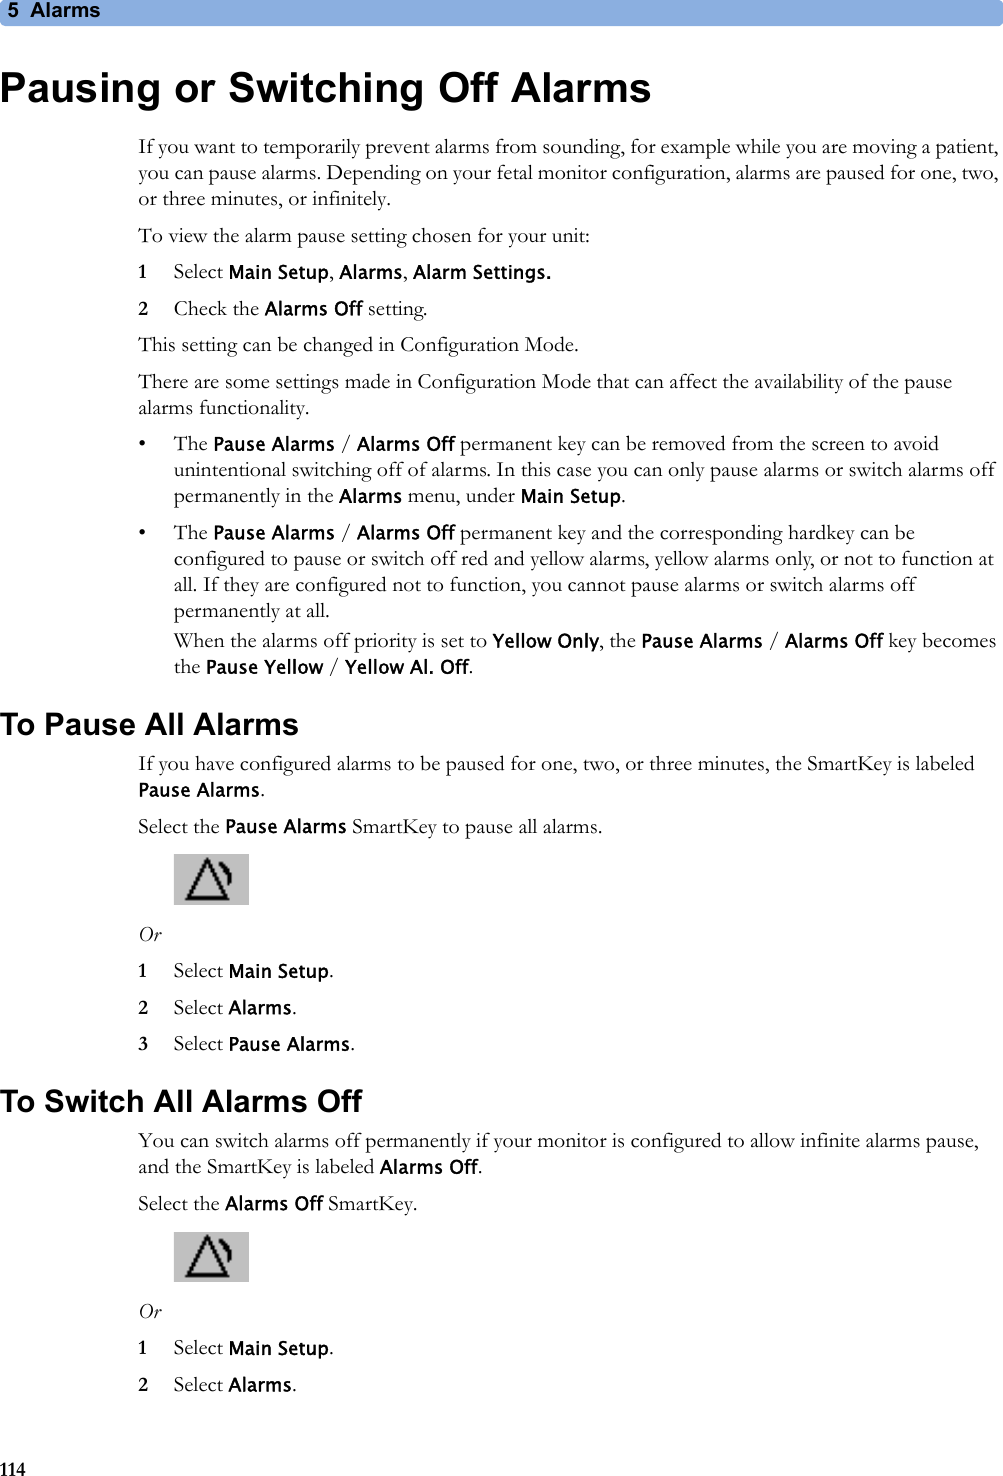 5 Alarms114Pausing or Switching Off AlarmsIf you want to temporarily prevent alarms from sounding, for example while you are moving a patient, you can pause alarms. Depending on your fetal monitor configuration, alarms are paused for one, two, or three minutes, or infinitely.To view the alarm pause setting chosen for your unit:1Select Main Setup, Alarms, Alarm Settings.2Check the Alarms Off setting.This setting can be changed in Configuration Mode.There are some settings made in Configuration Mode that can affect the availability of the pause alarms functionality.•The Pause Alarms / Alarms Off permanent key can be removed from the screen to avoid unintentional switching off of alarms. In this case you can only pause alarms or switch alarms off permanently in the Alarms menu, under Main Setup.•The Pause Alarms / Alarms Off permanent key and the corresponding hardkey can be configured to pause or switch off red and yellow alarms, yellow alarms only, or not to function at all. If they are configured not to function, you cannot pause alarms or switch alarms off permanently at all.When the alarms off priority is set to Yellow Only, the Pause Alarms / Alarms Off key becomes the Pause Yellow / Yellow Al. Off.To Pause All AlarmsIf you have configured alarms to be paused for one, two, or three minutes, the SmartKey is labeled Pause Alarms.Select the Pause Alarms SmartKey to pause all alarms.Or1Select Main Setup.2Select Alarms.3Select Pause Alarms.To Switch All Alarms OffYou can switch alarms off permanently if your monitor is configured to allow infinite alarms pause, and the SmartKey is labeled Alarms Off.Select the Alarms Off SmartKey.Or1Select Main Setup.2Select Alarms.